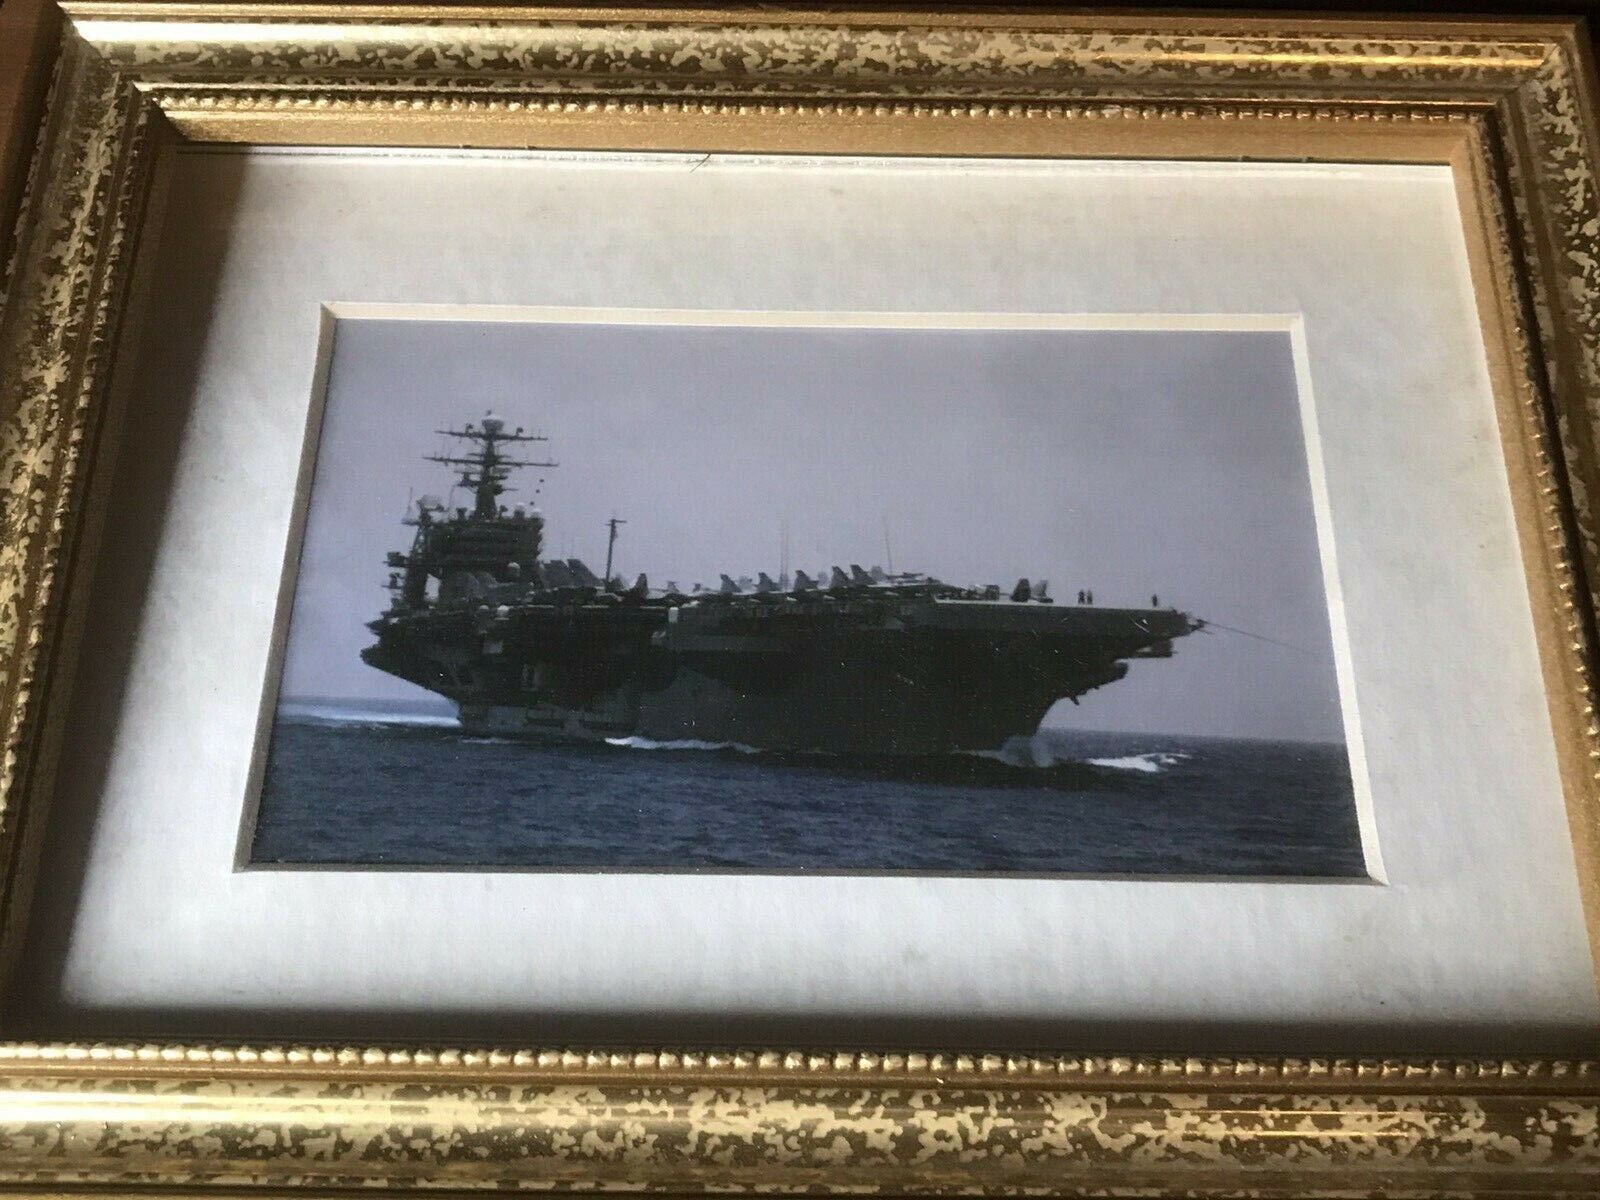 USS THEODORE ROOSEVELT WITH OTHER SHIPS  - 5X3 NAVY PHOTO 